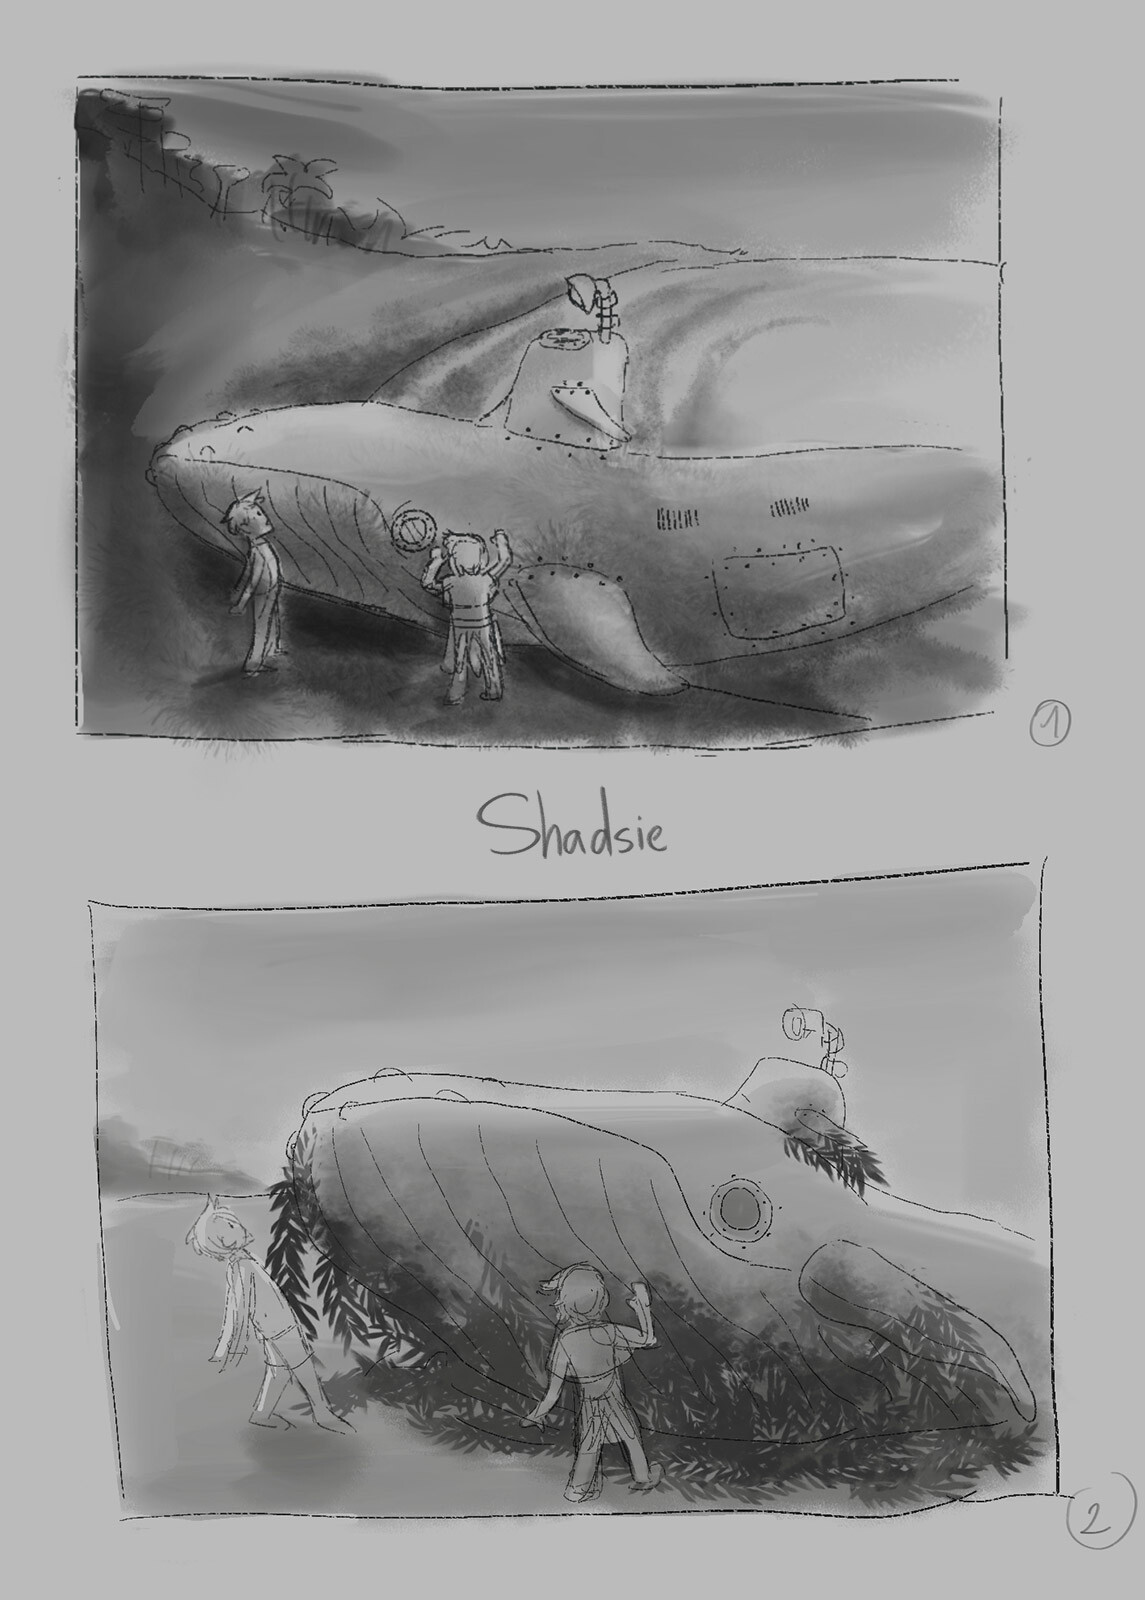 Thumbnails - they are very similar, but the second one had a more interesting perspective, so we went with that.